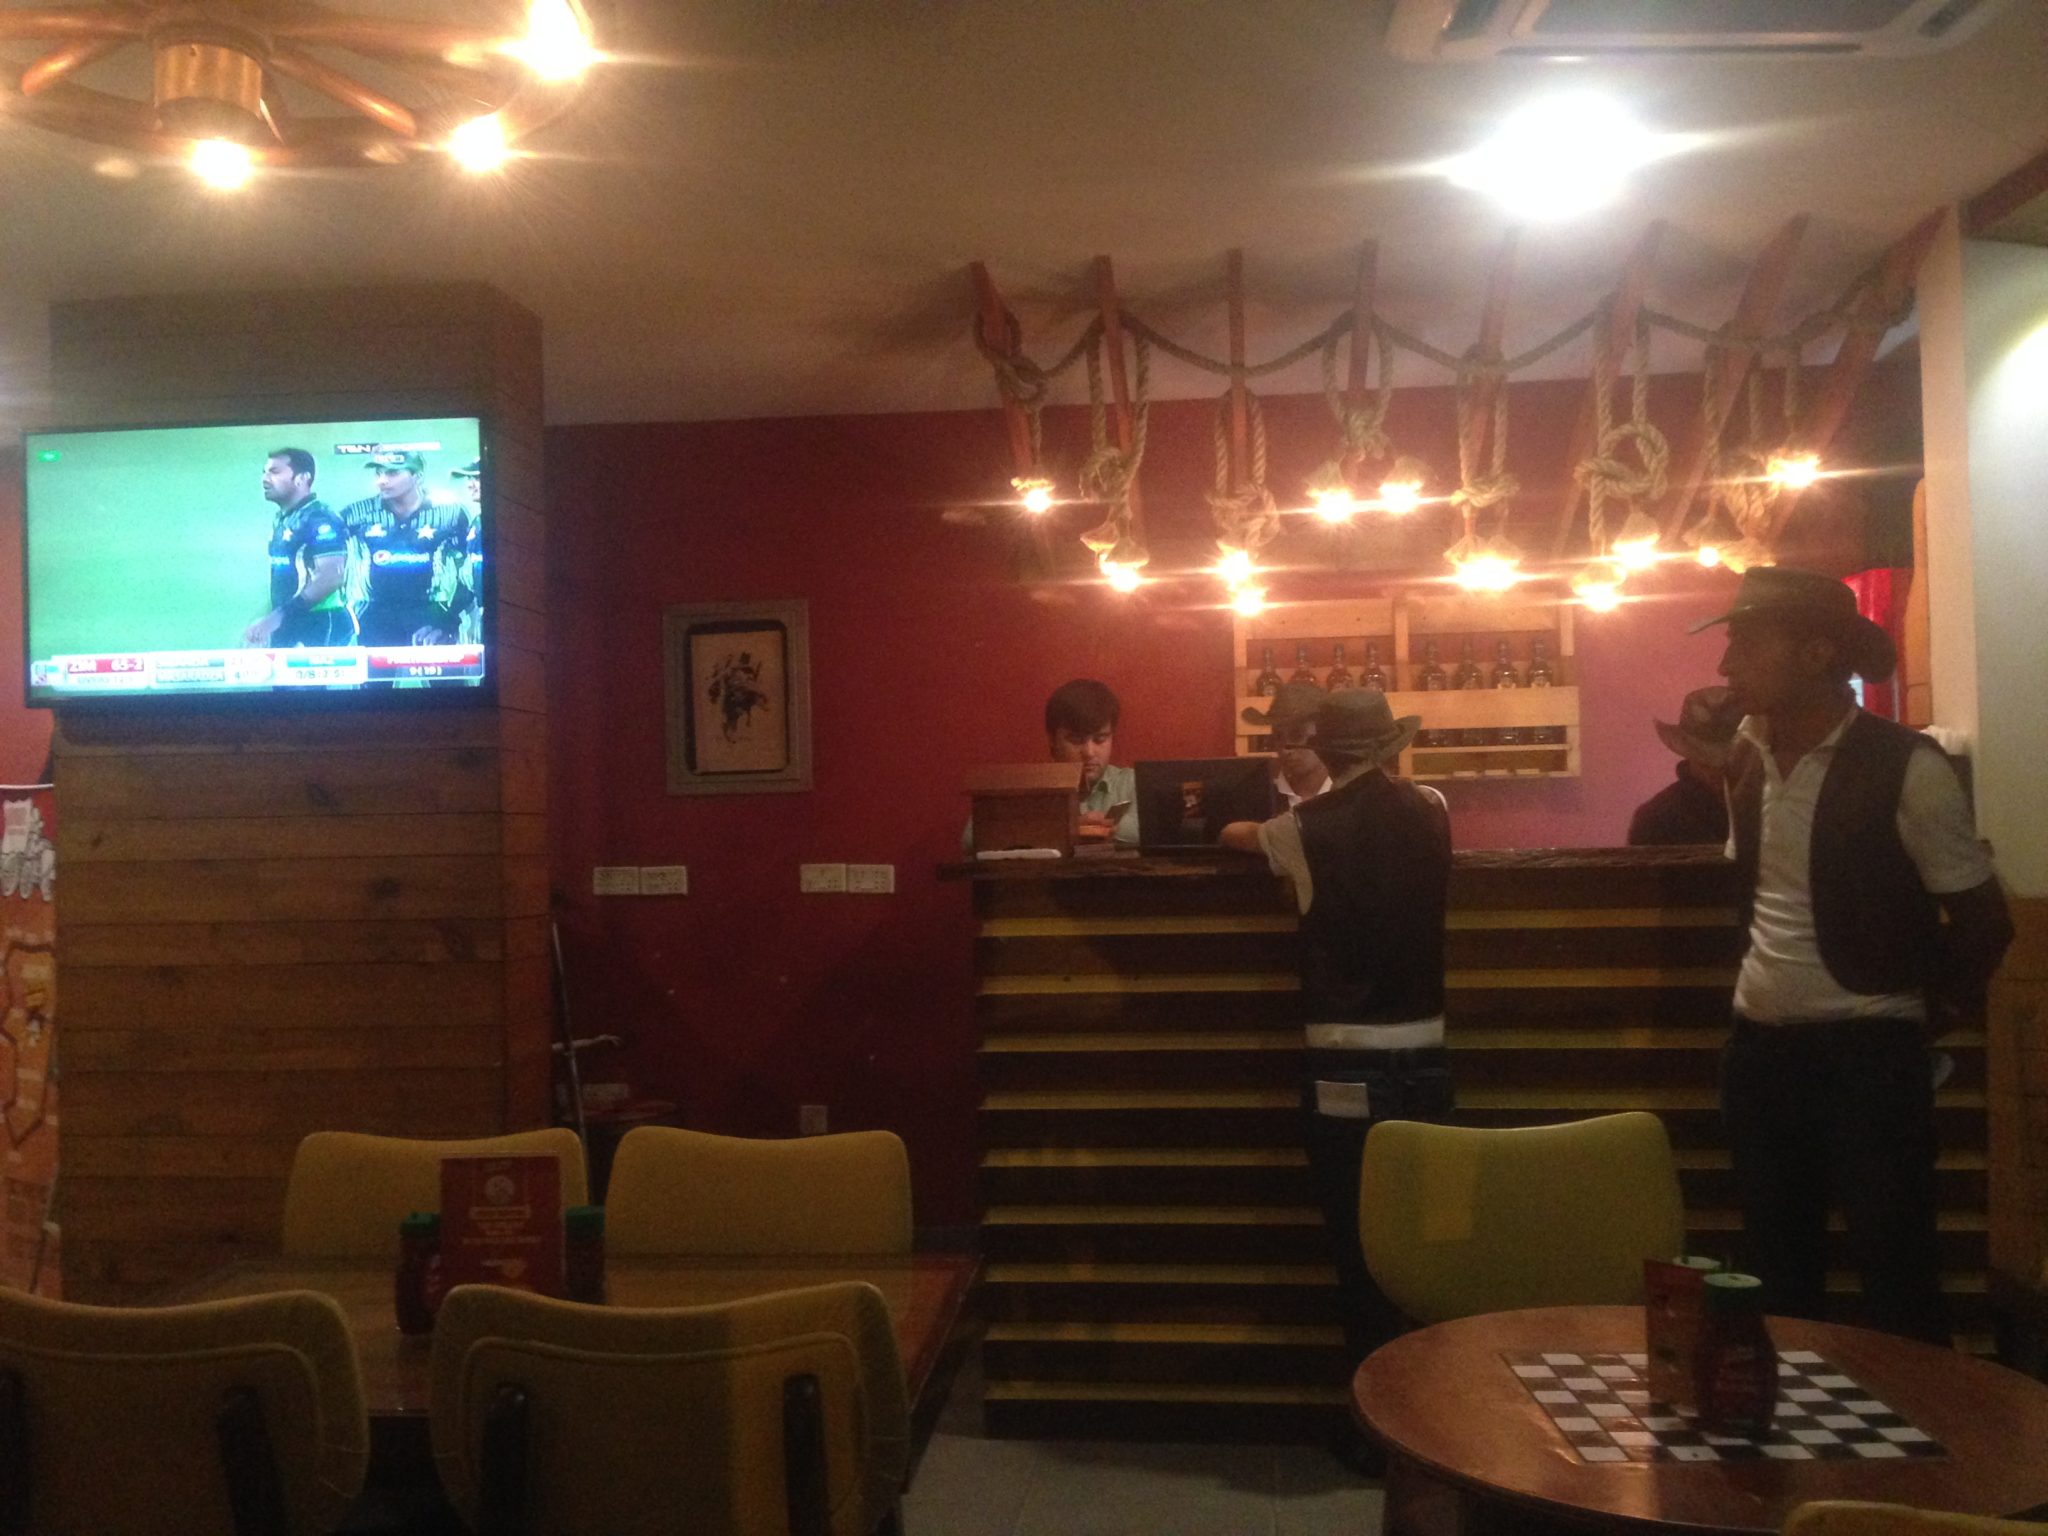 American diner, cricket on TV - only in Pakistan